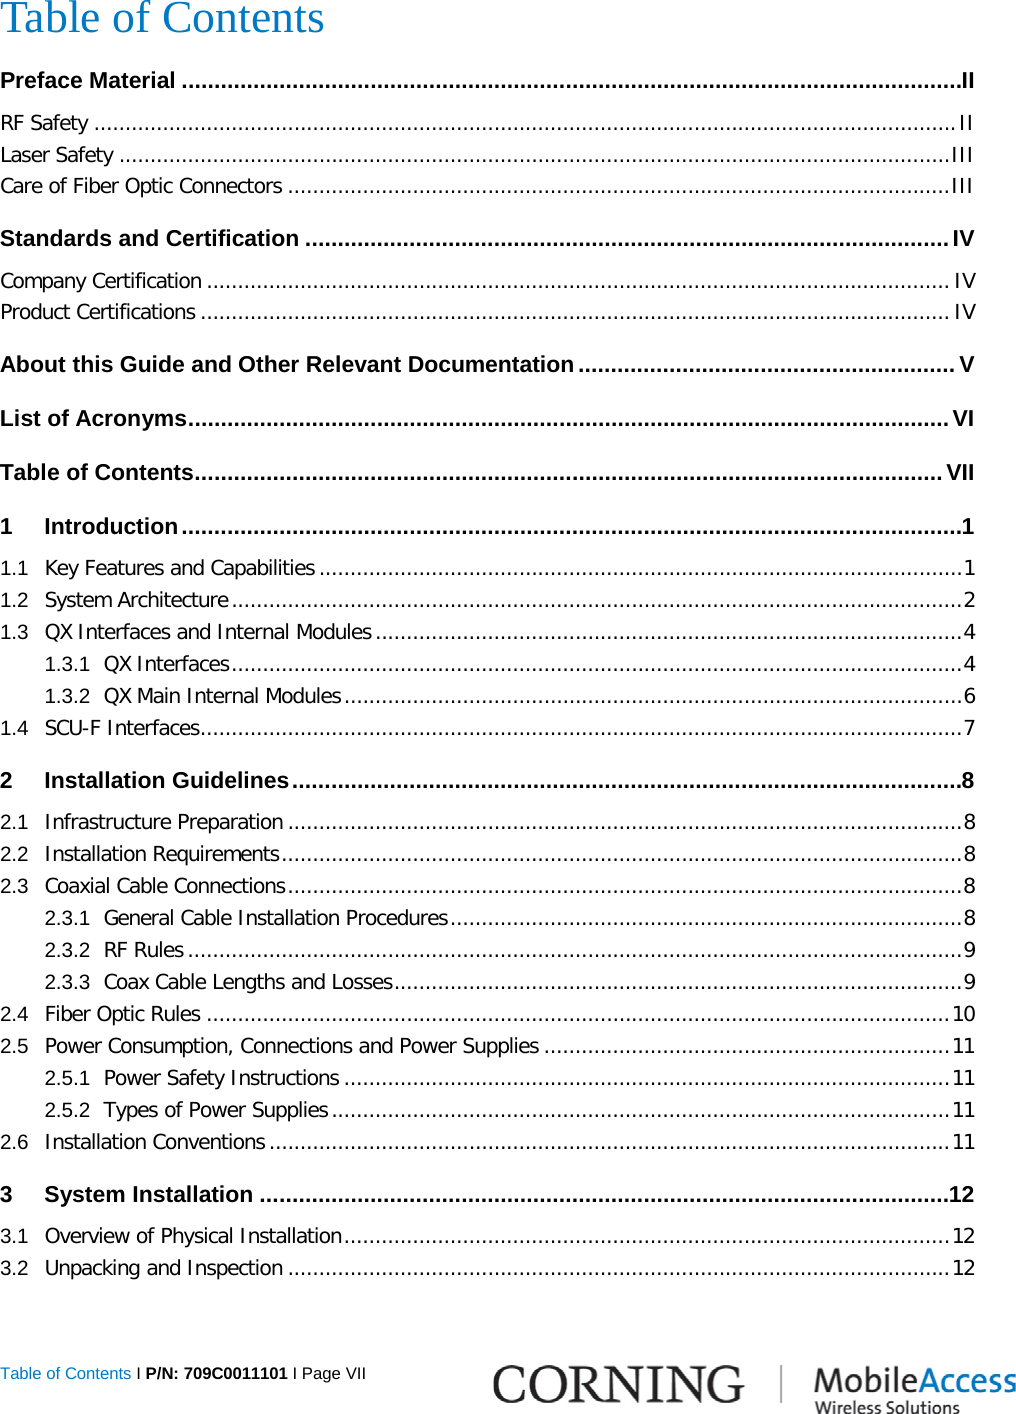  Table of Contents I P/N: 709C0011101 I Page VII  Table of Contents Preface Material ........................................................................................................................ II RF Safety .......................................................................................................................................... II Laser Safety ..................................................................................................................................... III Care of Fiber Optic Connectors .......................................................................................................... III Standards and Certification ................................................................................................... IV Company Certification ....................................................................................................................... IV Product Certifications ........................................................................................................................ IV About this Guide and Other Relevant Documentation .......................................................... V List of Acronyms ..................................................................................................................... VI Table of Contents ................................................................................................................... VII 1 Introduction ........................................................................................................................ 1 1.1 Key Features and Capabilities ....................................................................................................... 1 1.2 System Architecture ..................................................................................................................... 2 1.3 QX Interfaces and Internal Modules .............................................................................................. 4 1.3.1 QX Interfaces ..................................................................................................................... 4 1.3.2 QX Main Internal Modules ................................................................................................... 6 1.4 SCU-F Interfaces .......................................................................................................................... 7 2 Installation Guidelines ....................................................................................................... 8 2.1 Infrastructure Preparation ............................................................................................................ 8 2.2 Installation Requirements ............................................................................................................. 8 2.3 Coaxial Cable Connections ............................................................................................................ 8 2.3.1 General Cable Installation Procedures .................................................................................. 8 2.3.2 RF Rules ............................................................................................................................ 9 2.3.3 Coax Cable Lengths and Losses ........................................................................................... 9 2.4 Fiber Optic Rules ....................................................................................................................... 10 2.5 Power Consumption, Connections and Power Supplies ................................................................. 11 2.5.1 Power Safety Instructions ................................................................................................. 11 2.5.2 Types of Power Supplies ................................................................................................... 11 2.6 Installation Conventions ............................................................................................................. 11 3 System Installation .......................................................................................................... 12 3.1 Overview of Physical Installation ................................................................................................. 12 3.2 Unpacking and Inspection .......................................................................................................... 12 